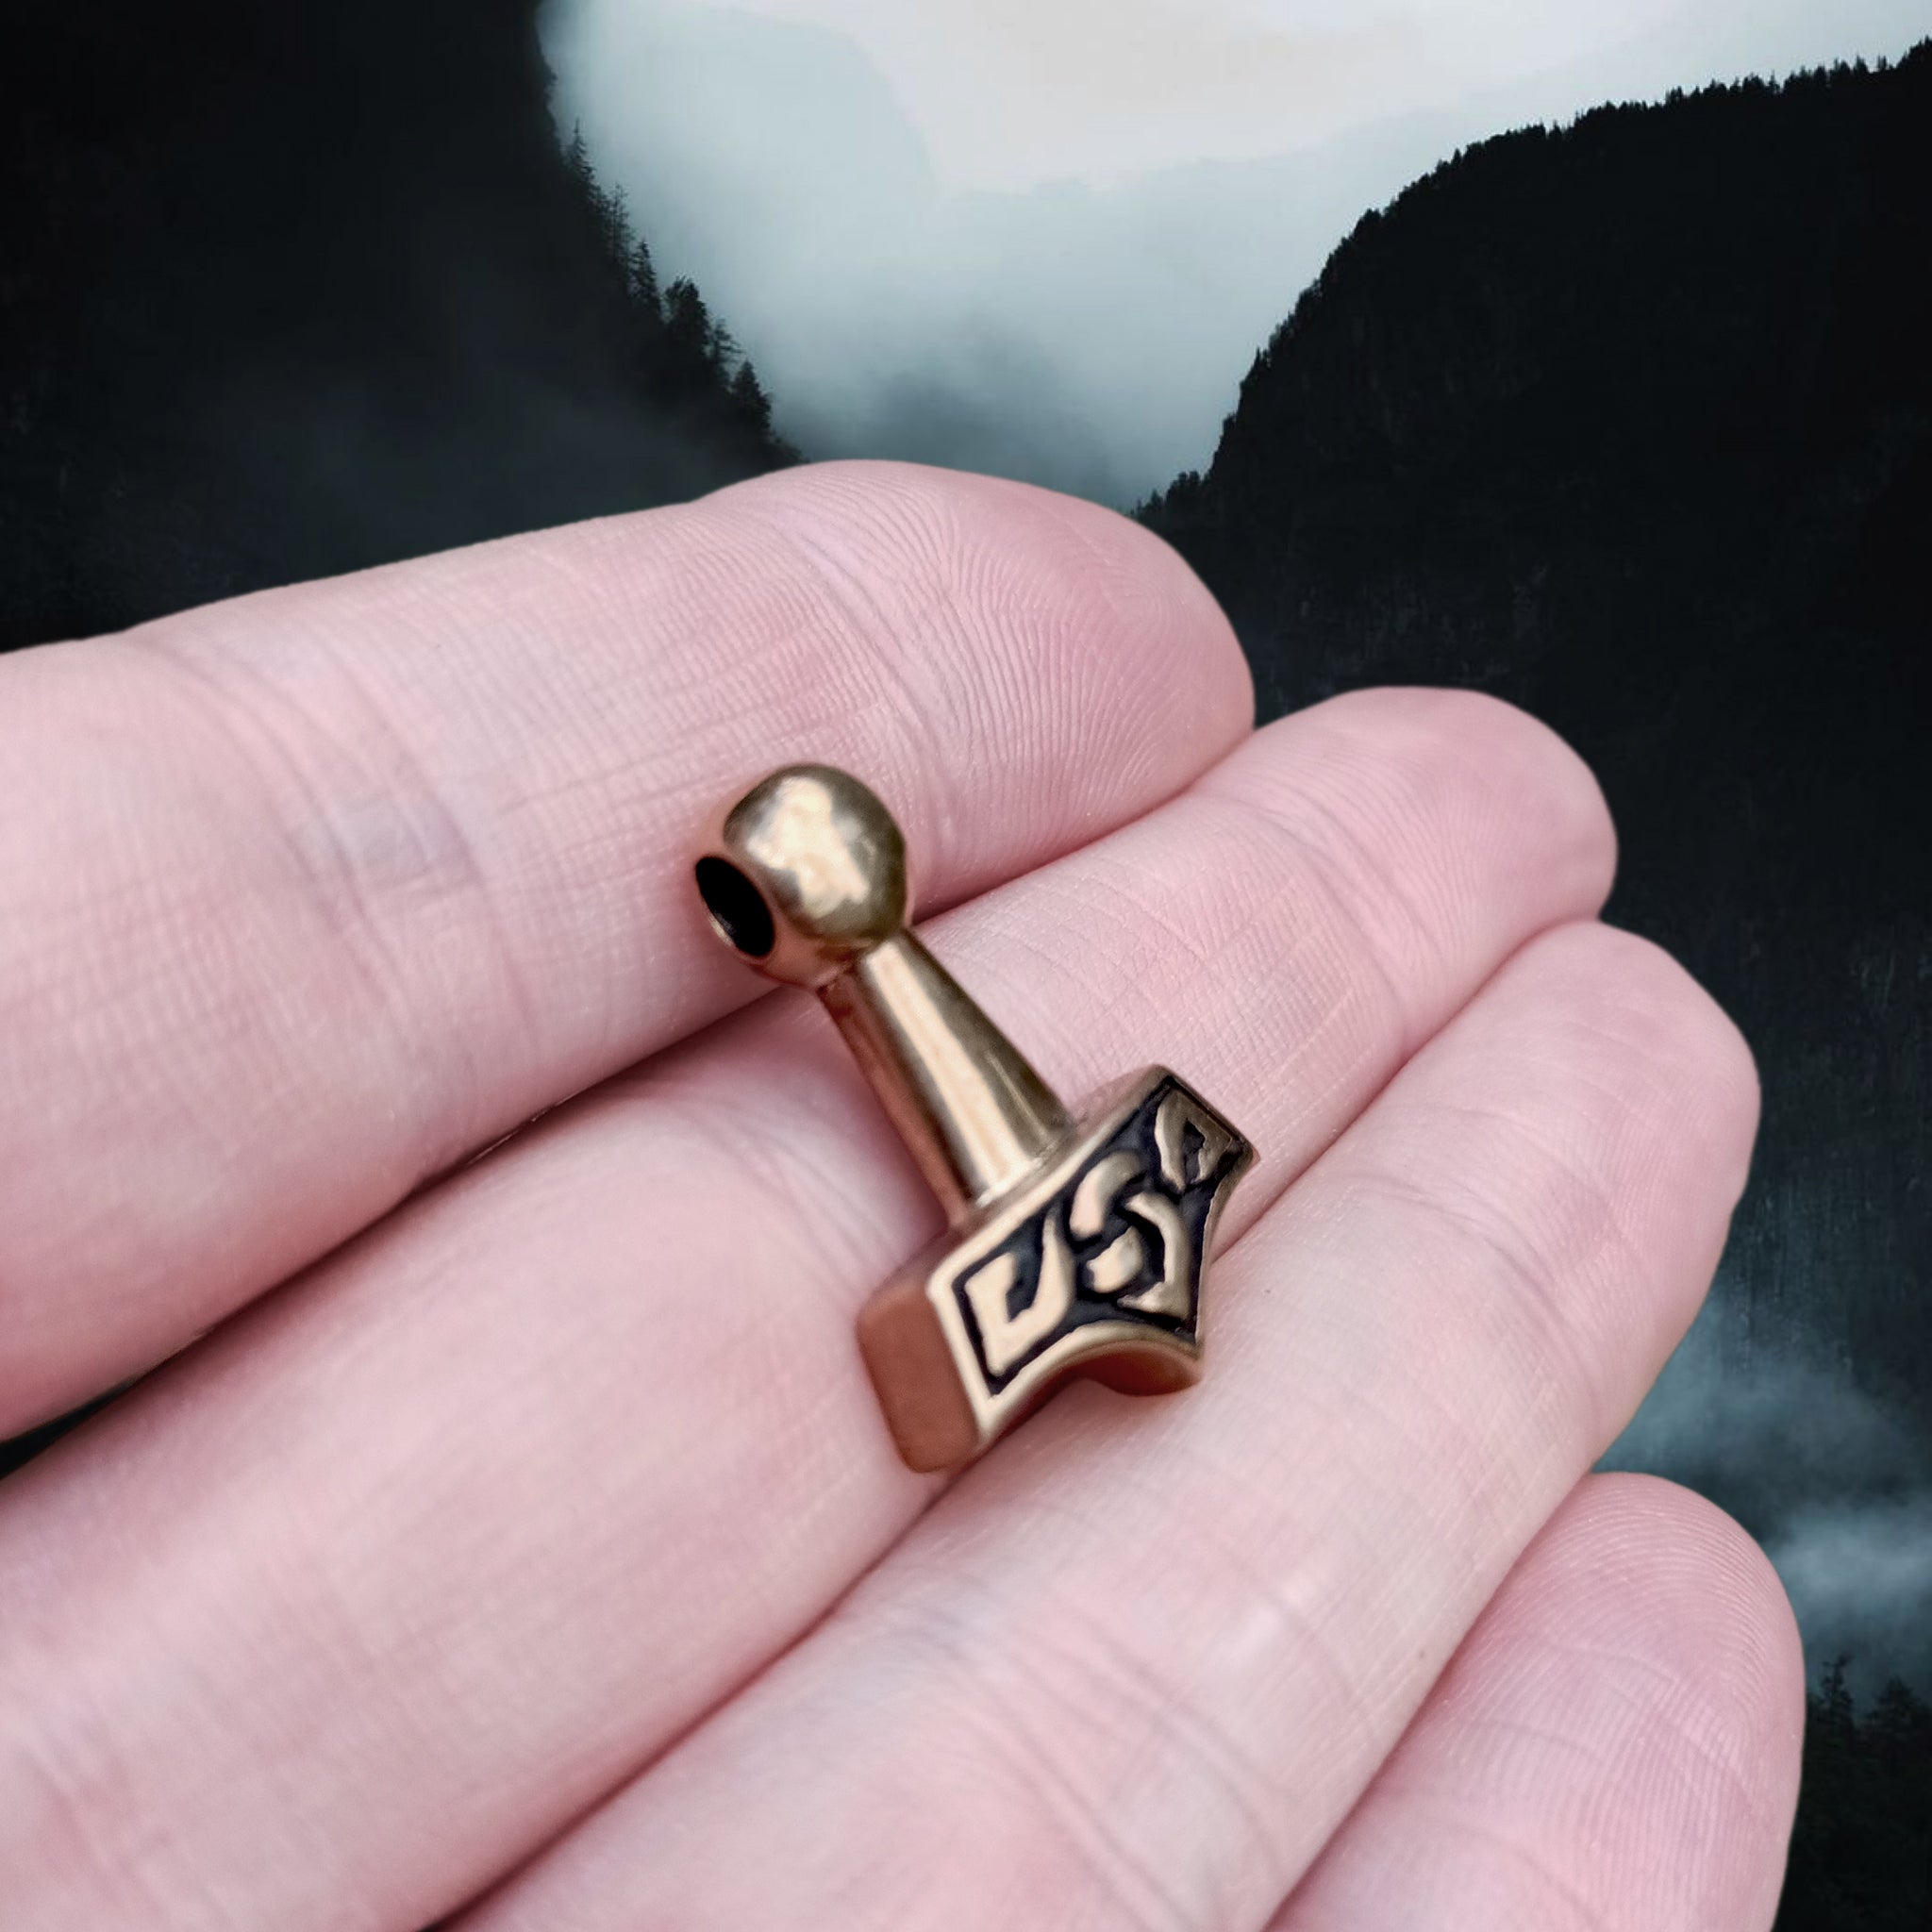 Small Bronze Knotwork Thors Hammer Pendant on Hand - Angle View